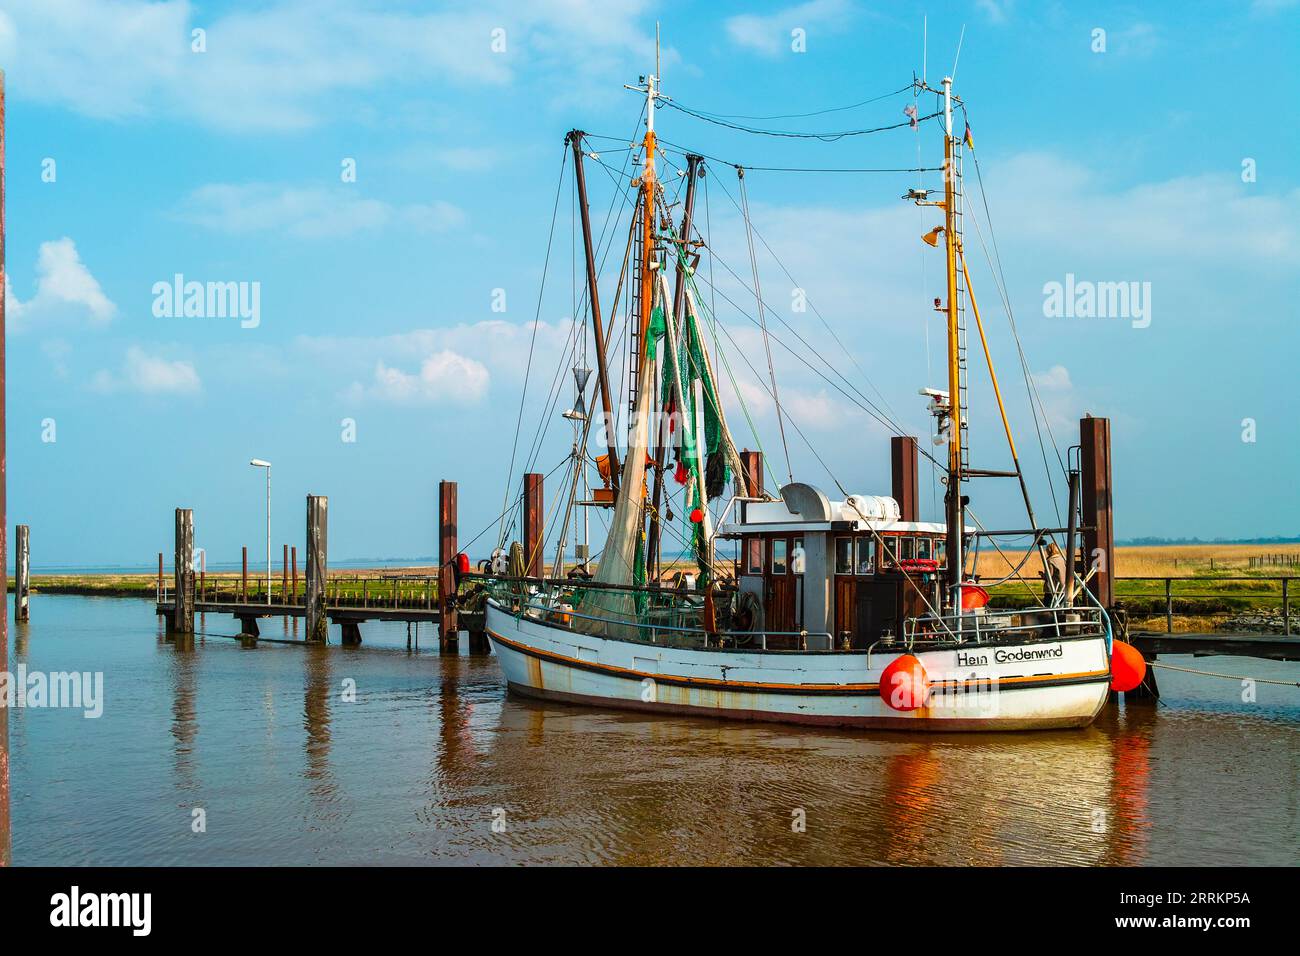 The shrimp cutter 'Godewind' is moored in the outer harbor of Varel. Stock Photo